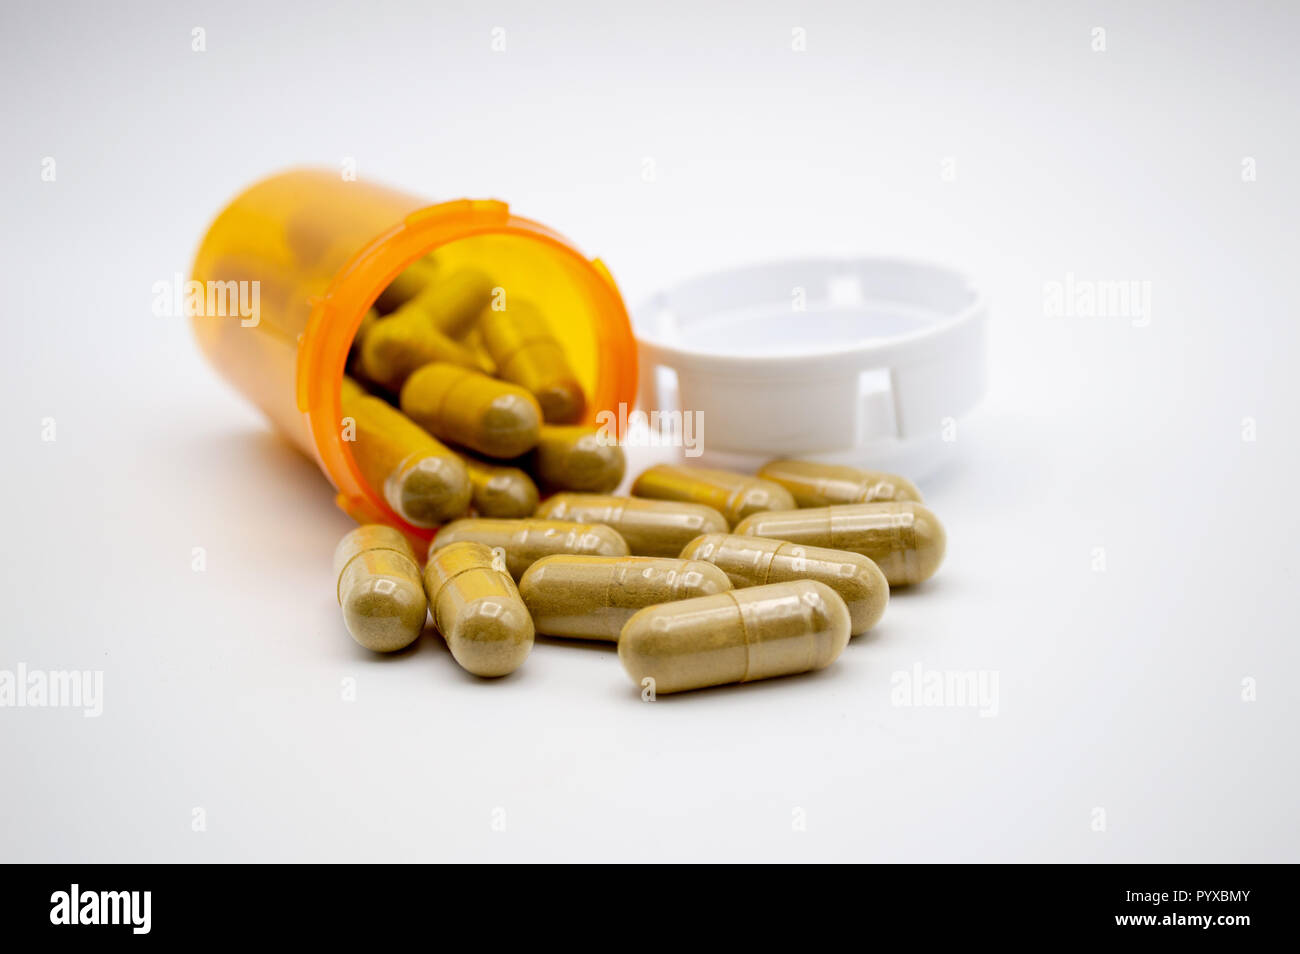 Green capsules of Kratom powder spilling out of an orange pill bottle with white cap onto a white background Stock Photo